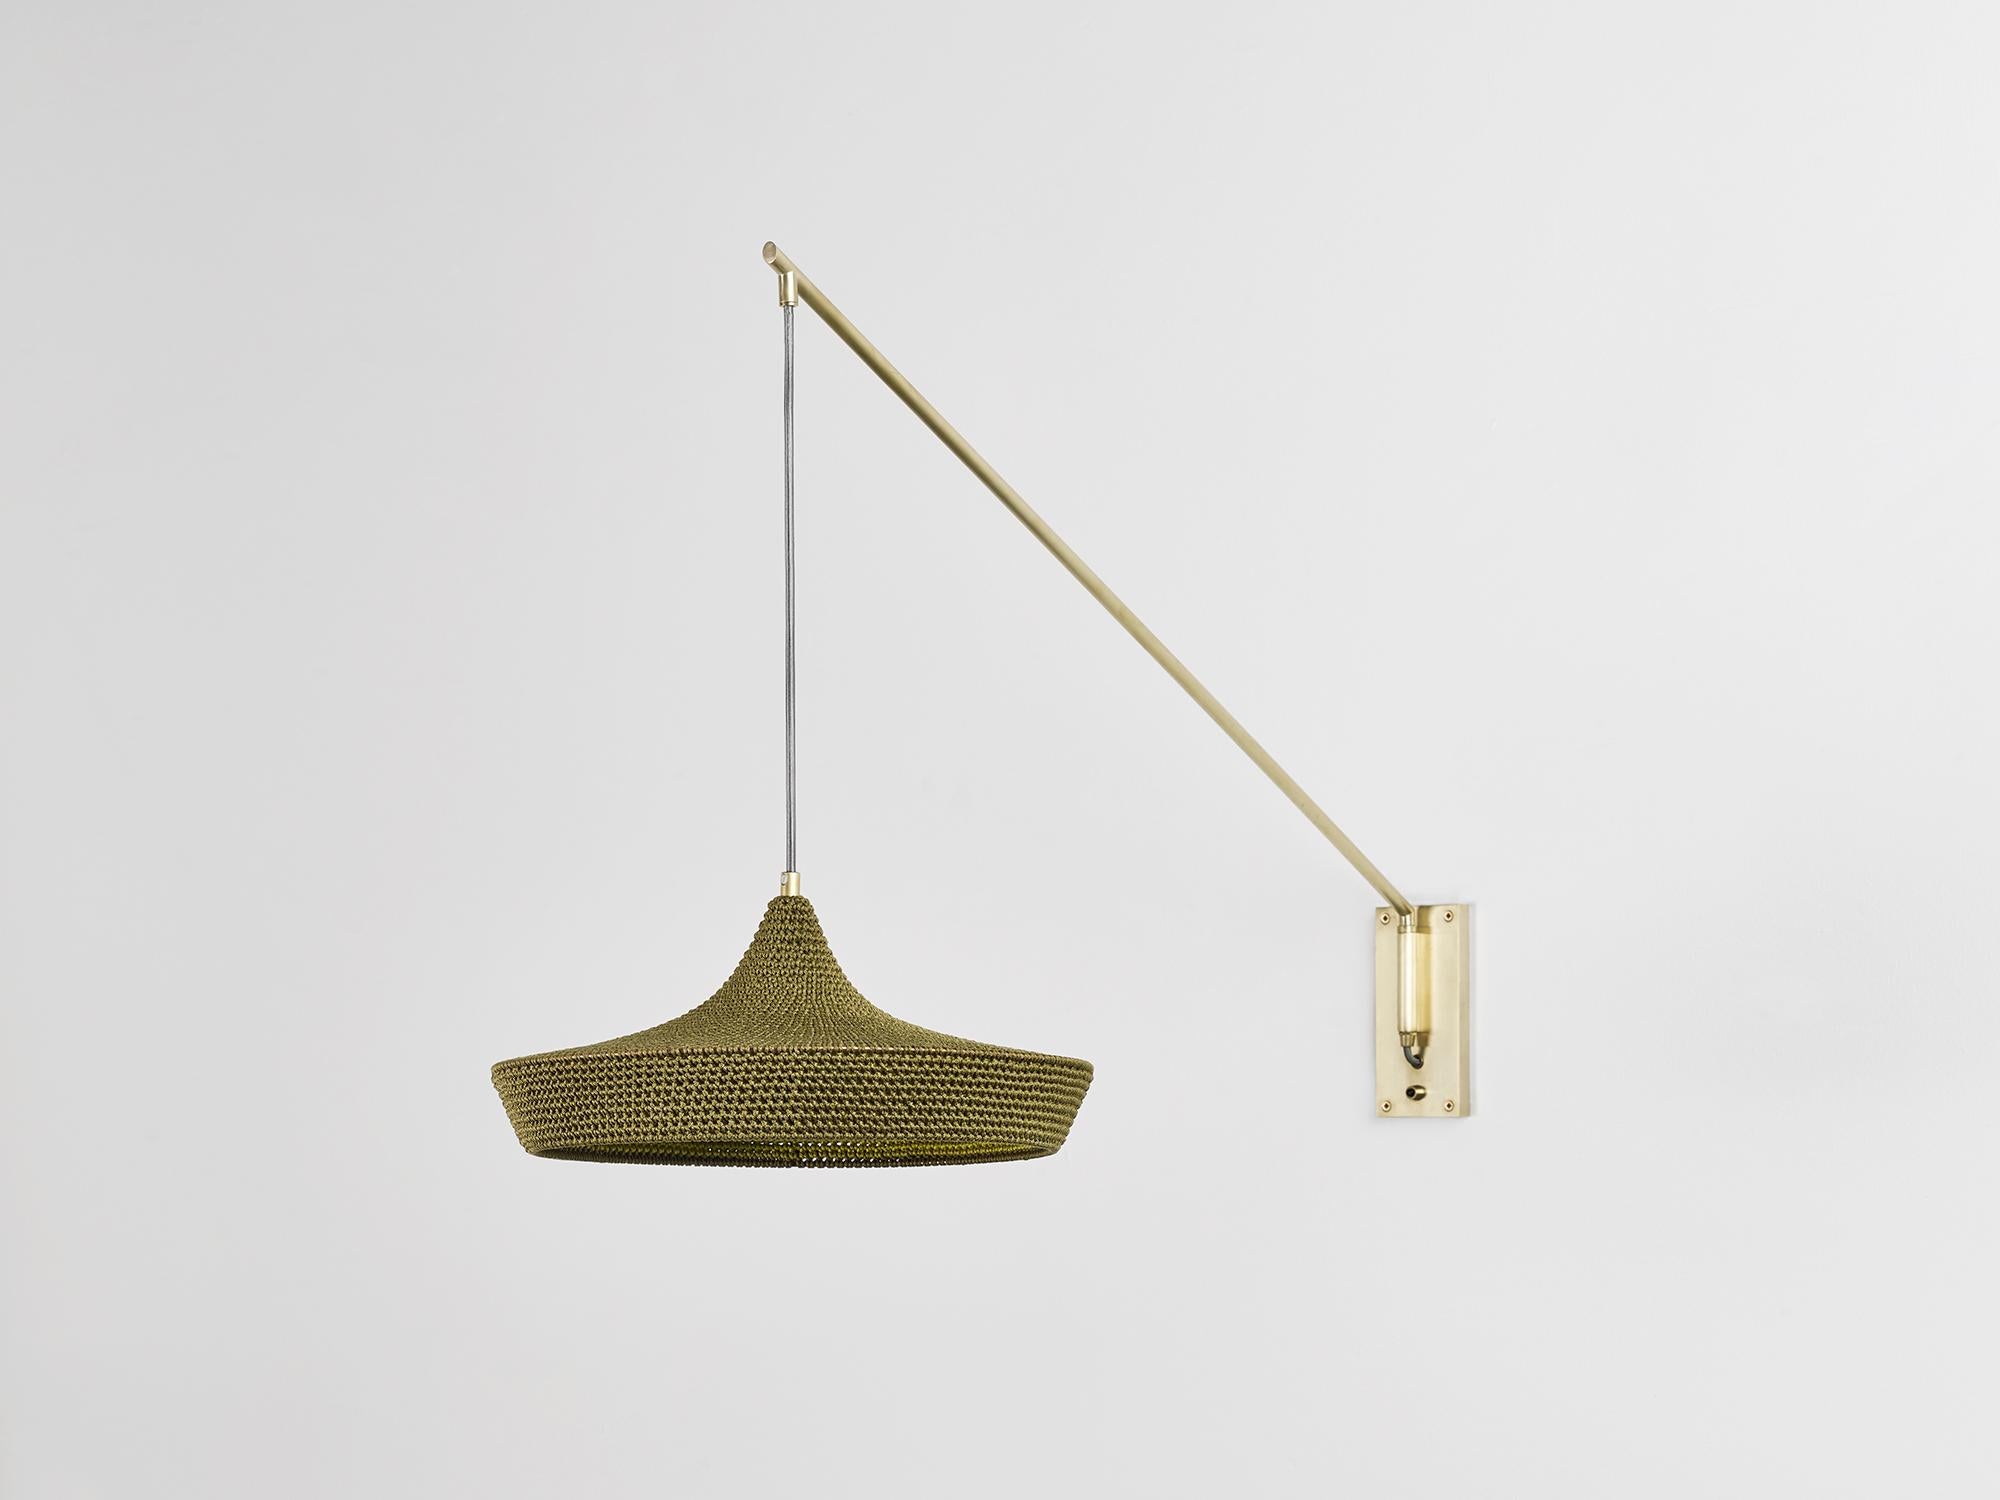 Large cave wall lamp by Naomi Paul
Dimensions: D 50 x W 102 x H 58 cm
Materials: Metal frame, Egyptian cotton cord.
Color: Olive and Green Gold inside edge.
Available in other colors and in 2 sizes: D30 x W50, D50 x W102 cm.
Available in Inside